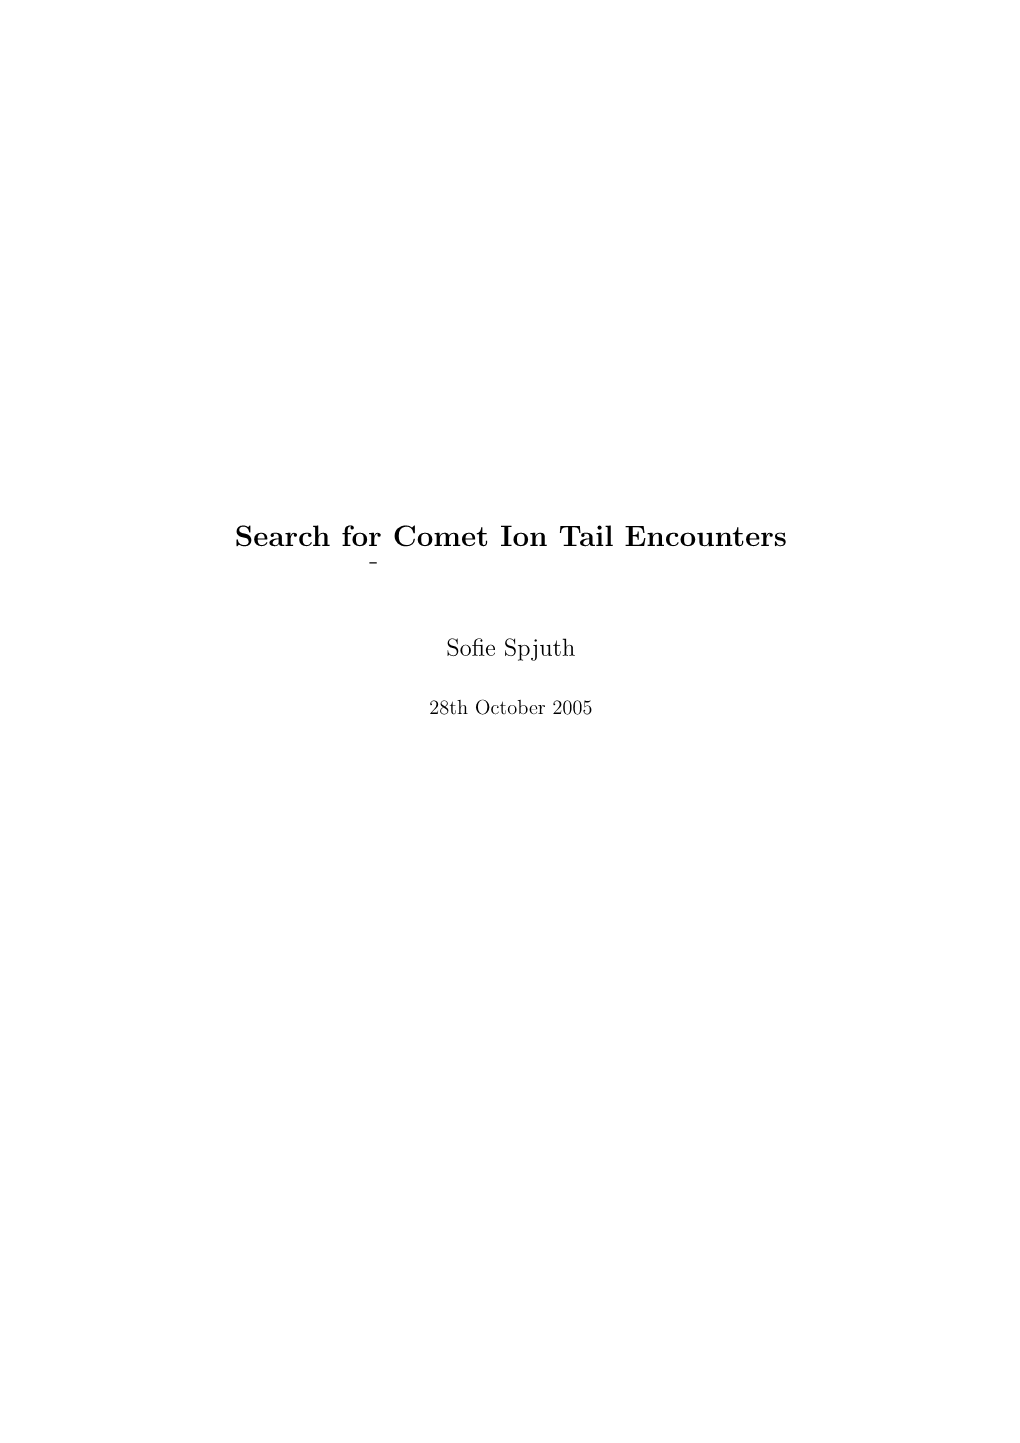 Search for Comet Ion Tail Encounters - Prediction and Data Analysis